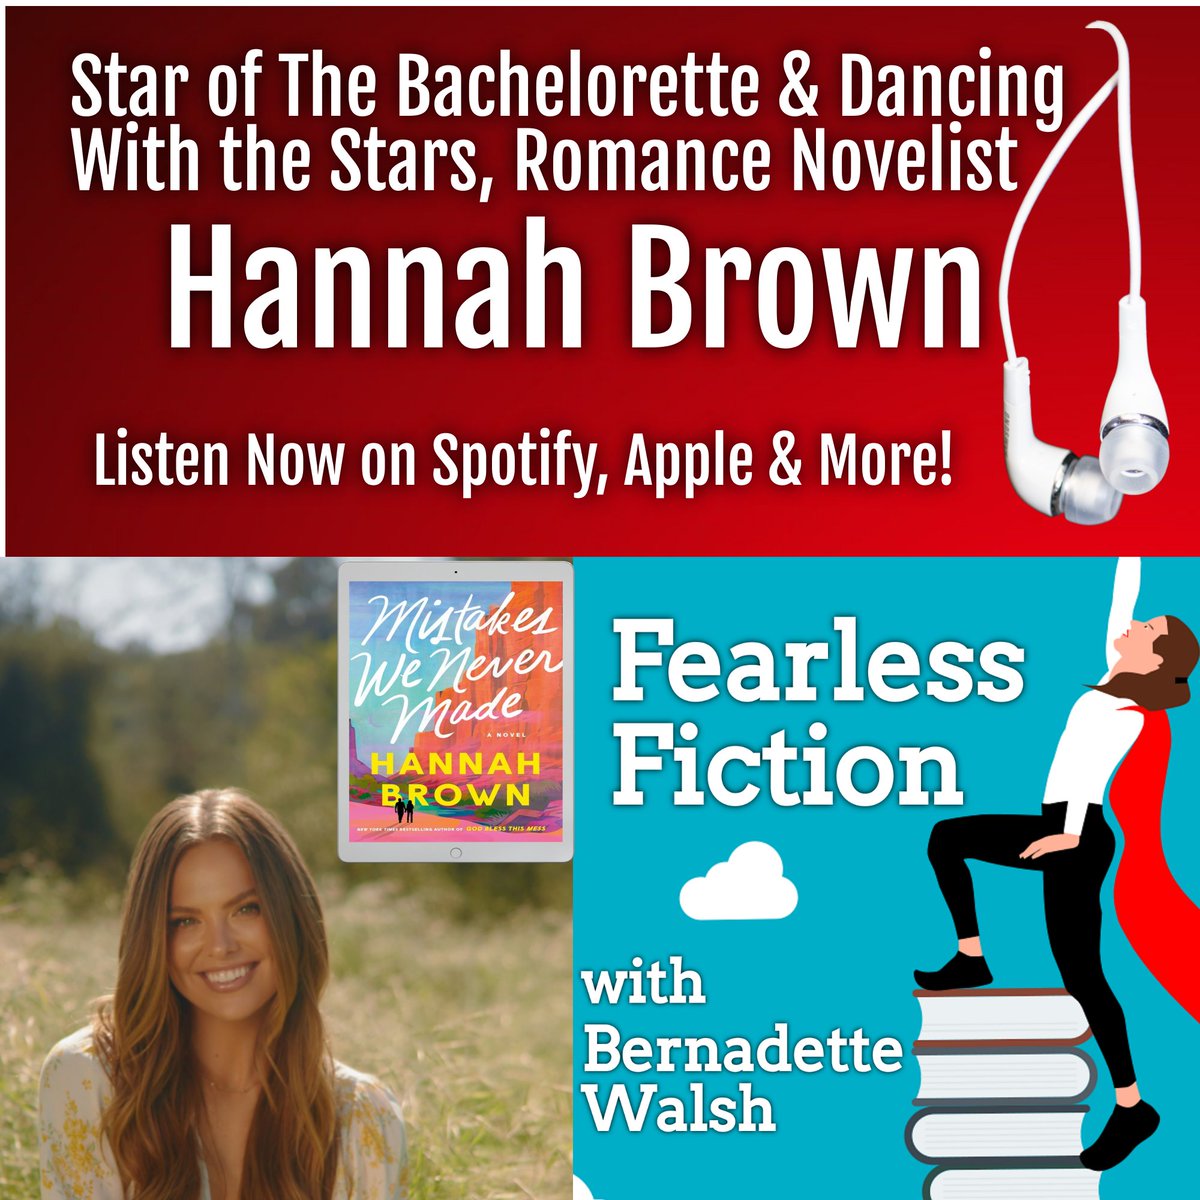 I Had a great time chatting with #TheBachelorette @hannahbrown about her new #RomanceNovel   Be sure to check out this #authorinterview #readingcommunity #contemporaryromance #amreading blogtalkradio.com/bernadettewals…